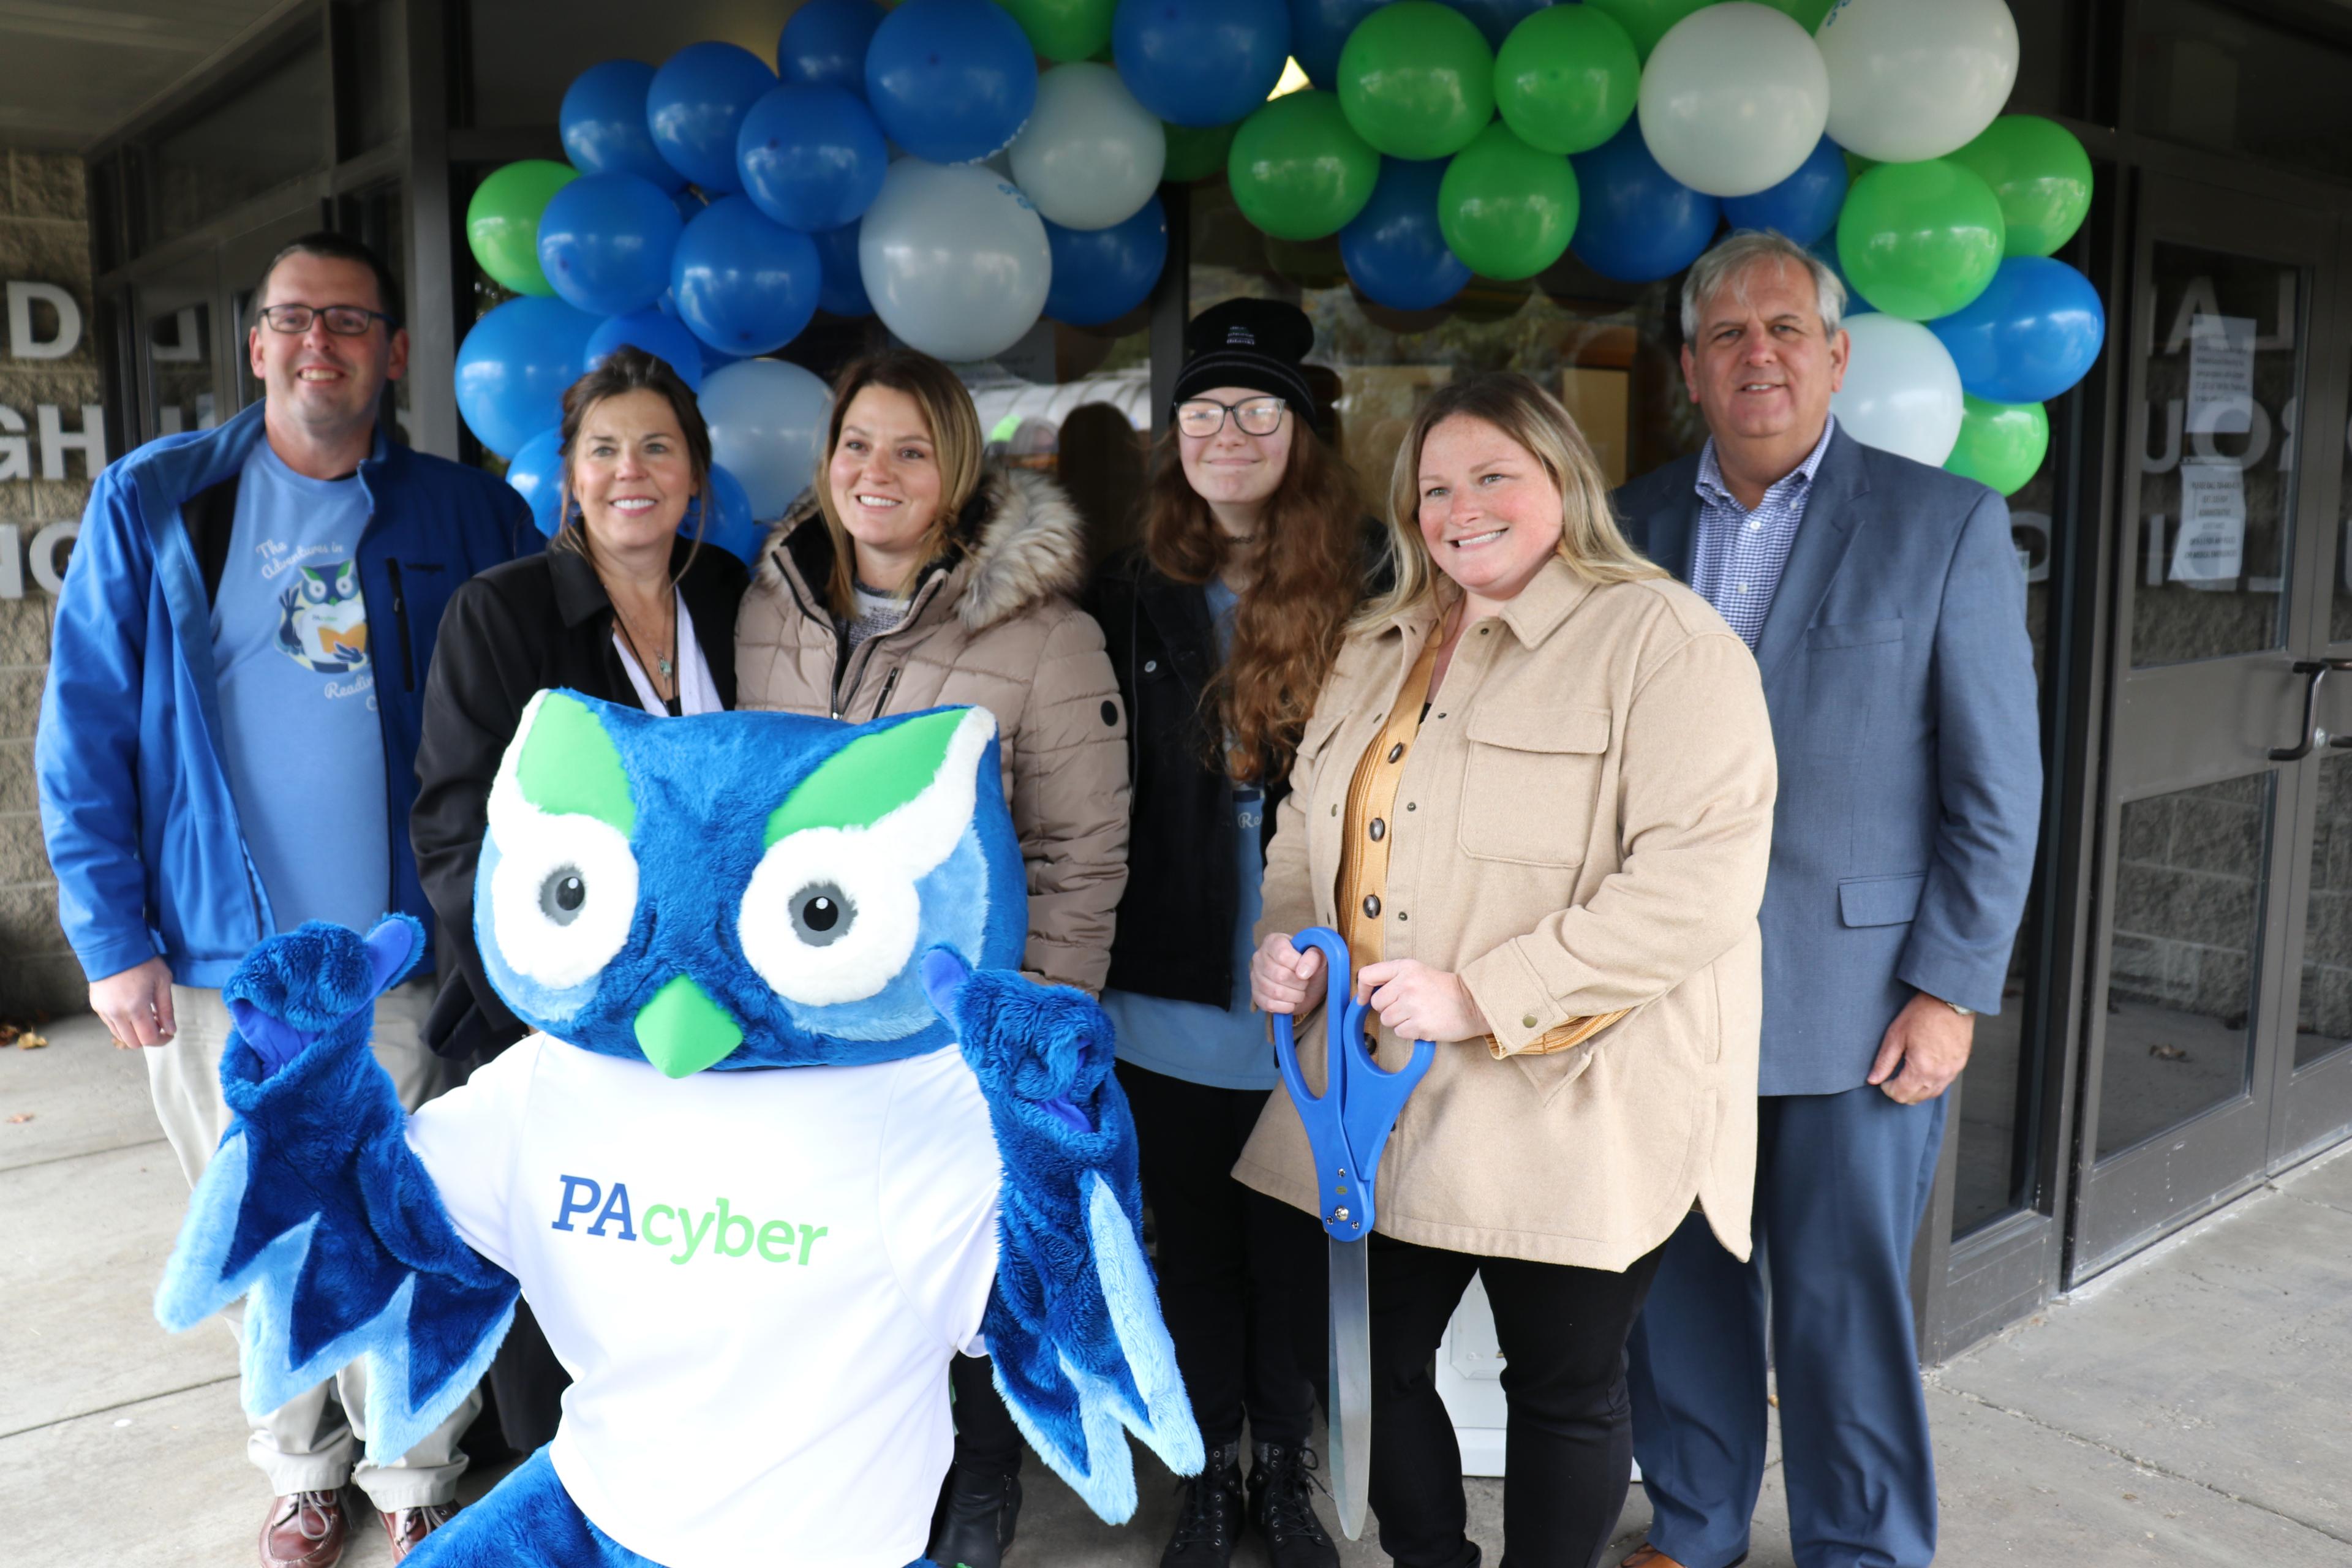 Six PA Cyber employees pose with mascot Archie the Owl in front of a balloon arch.